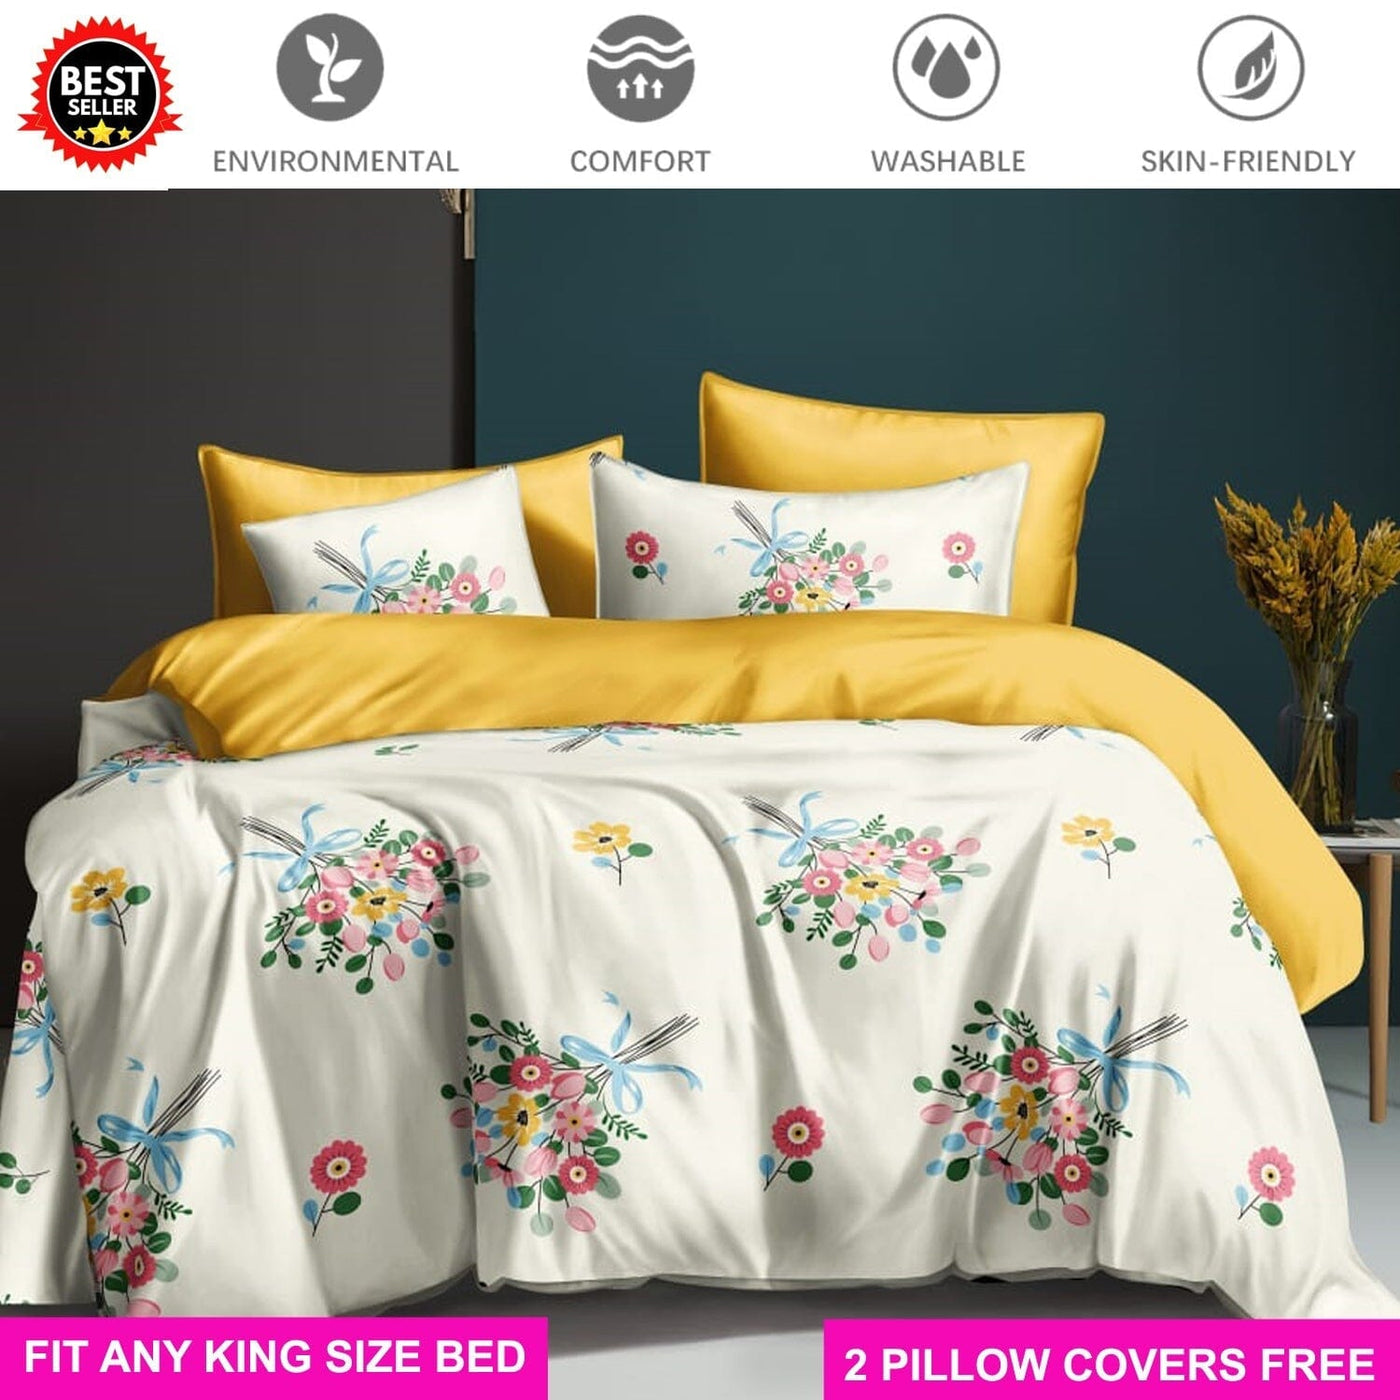 White Bouquet Full Elastic Fitted Bedsheet with 2 Pillow Covers Bed Sheets Great Happy IN KING SIZE - ₹1299 